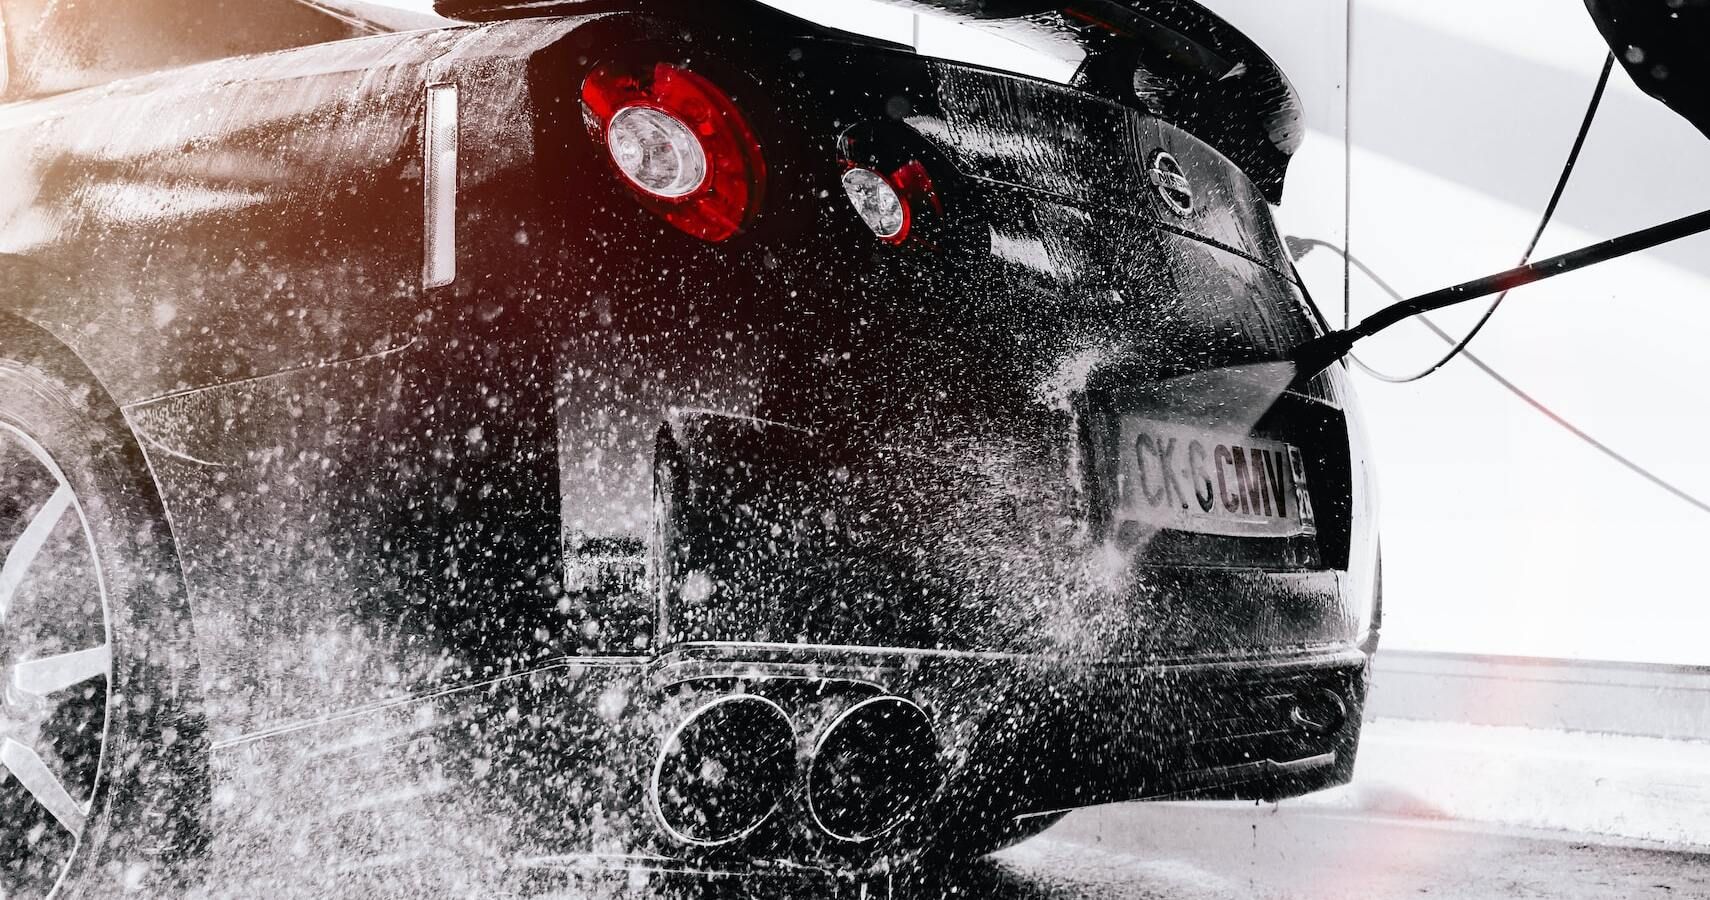 A Nissan GT-R R35 being washed